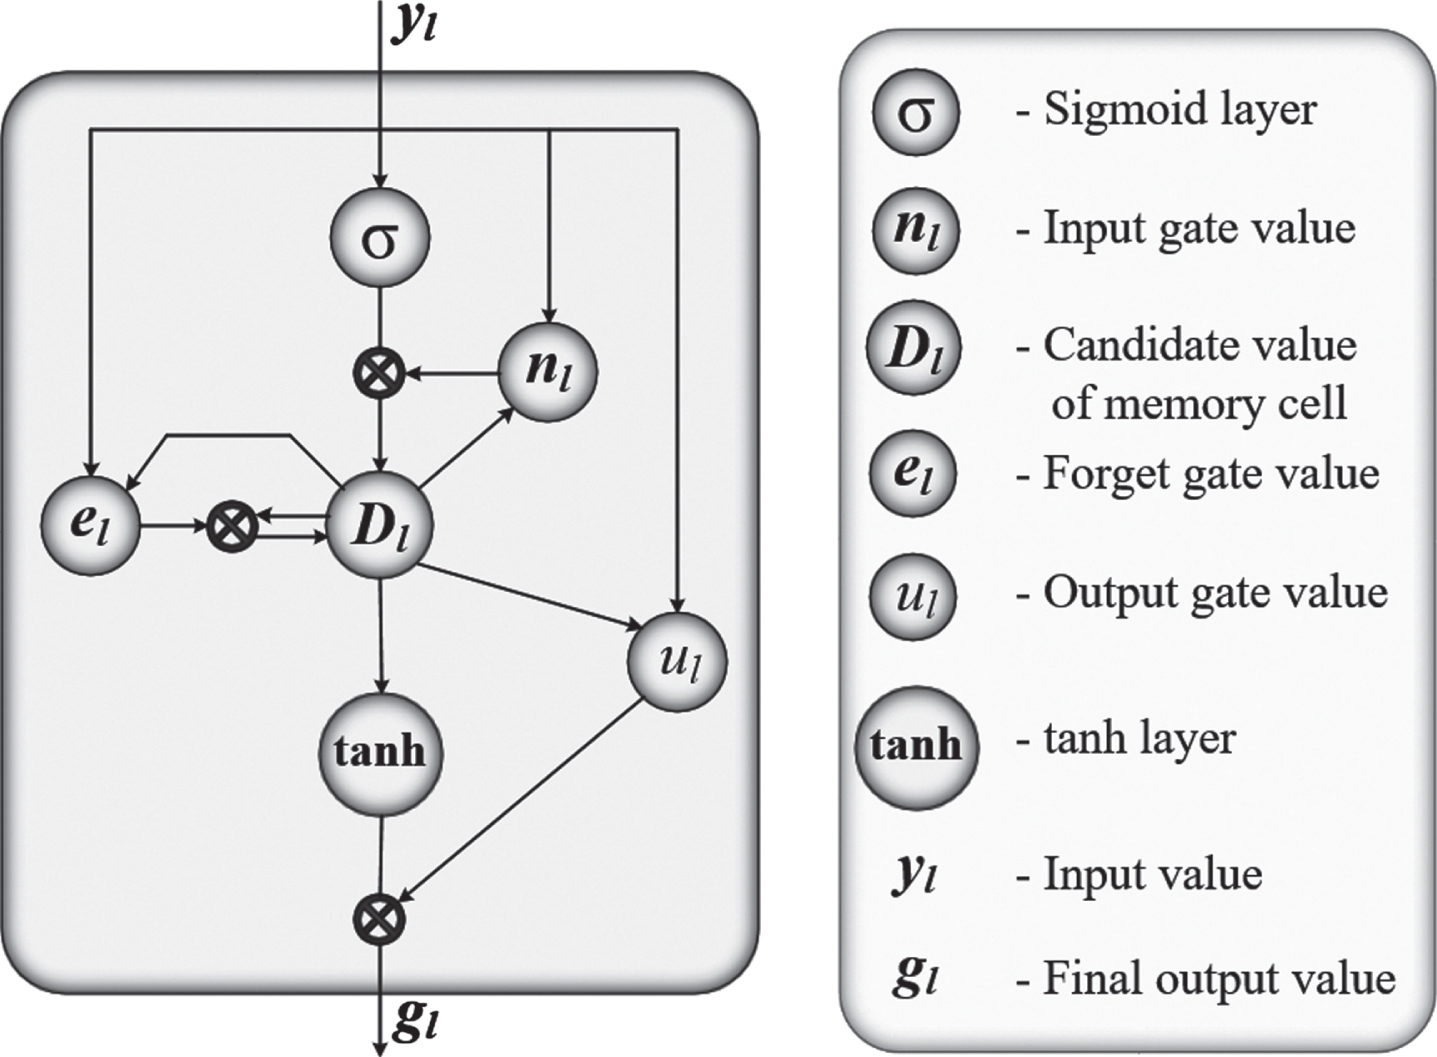 The architecture of traditional Long Short-Term Memory (LSTM).